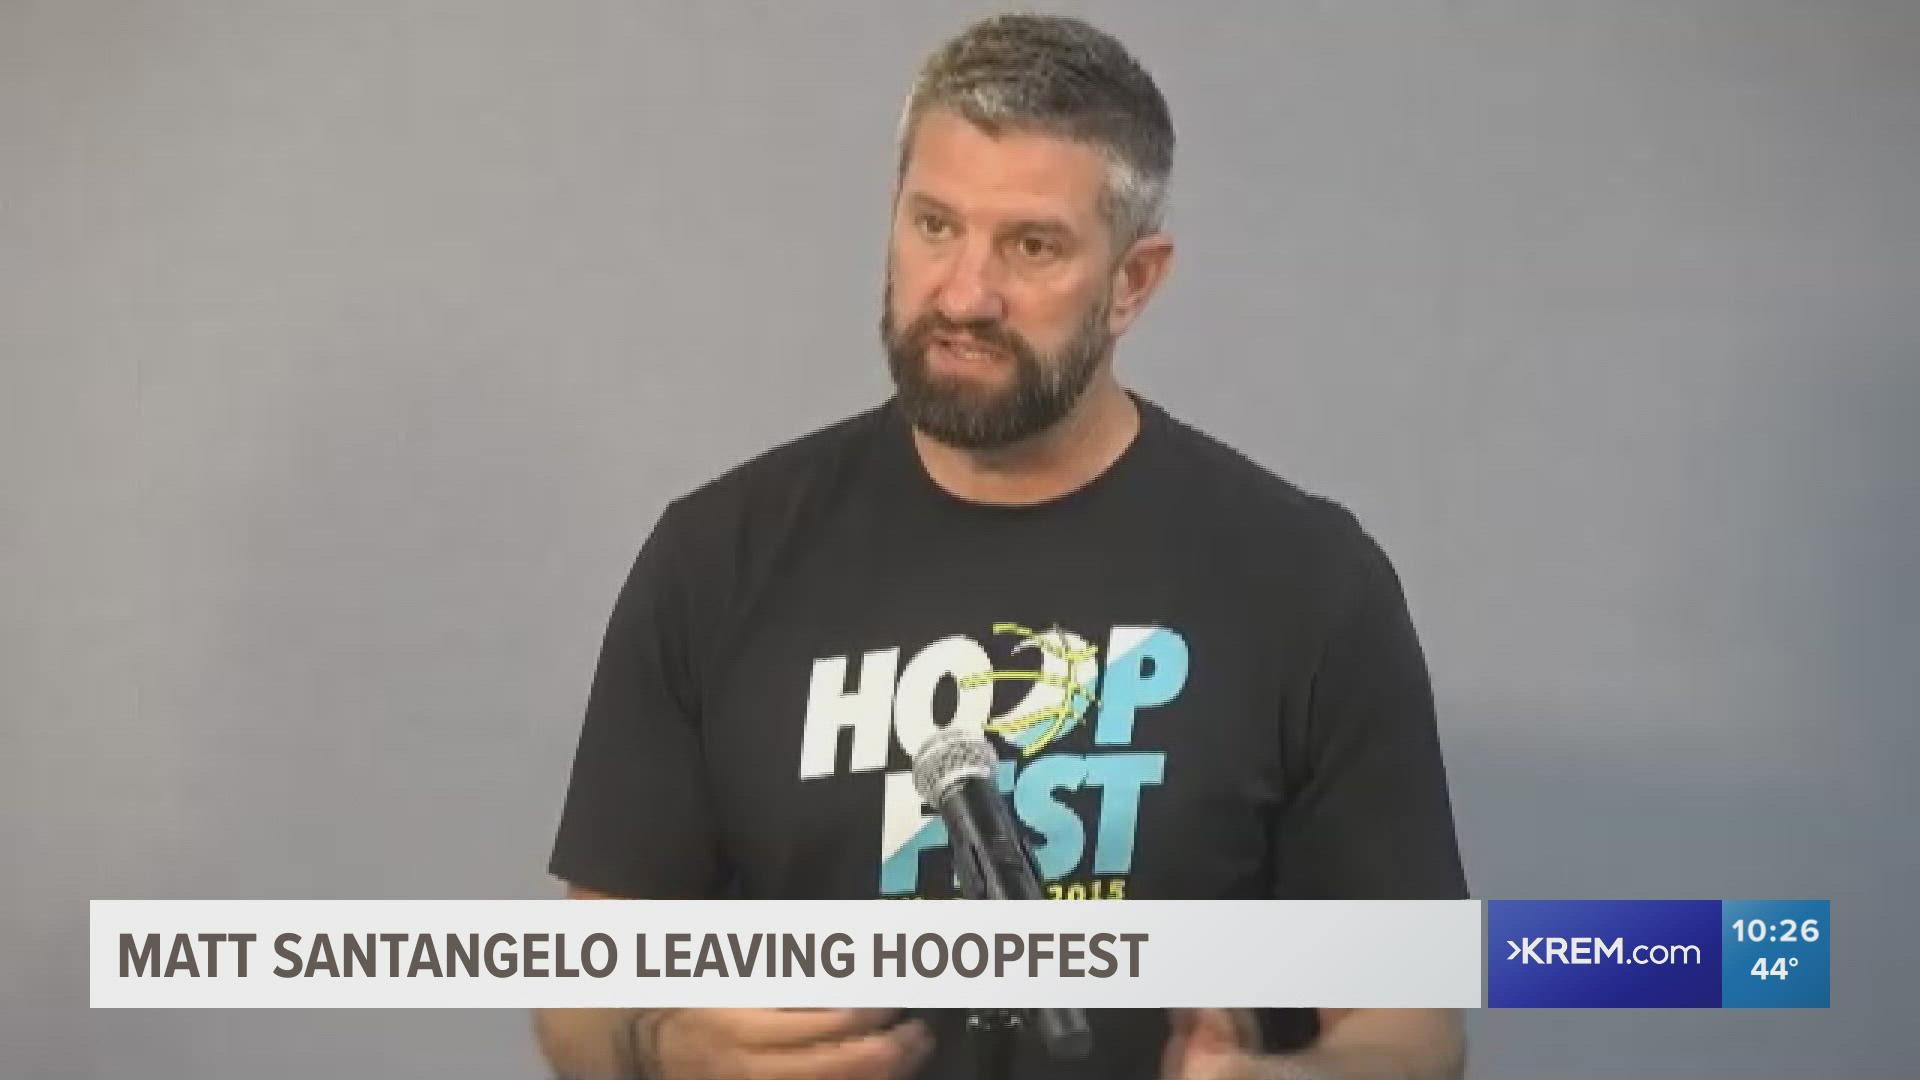 Santangelo was the executive director of Hoopfest, the world's largest three-on-three basketball tournament, for over seven years.